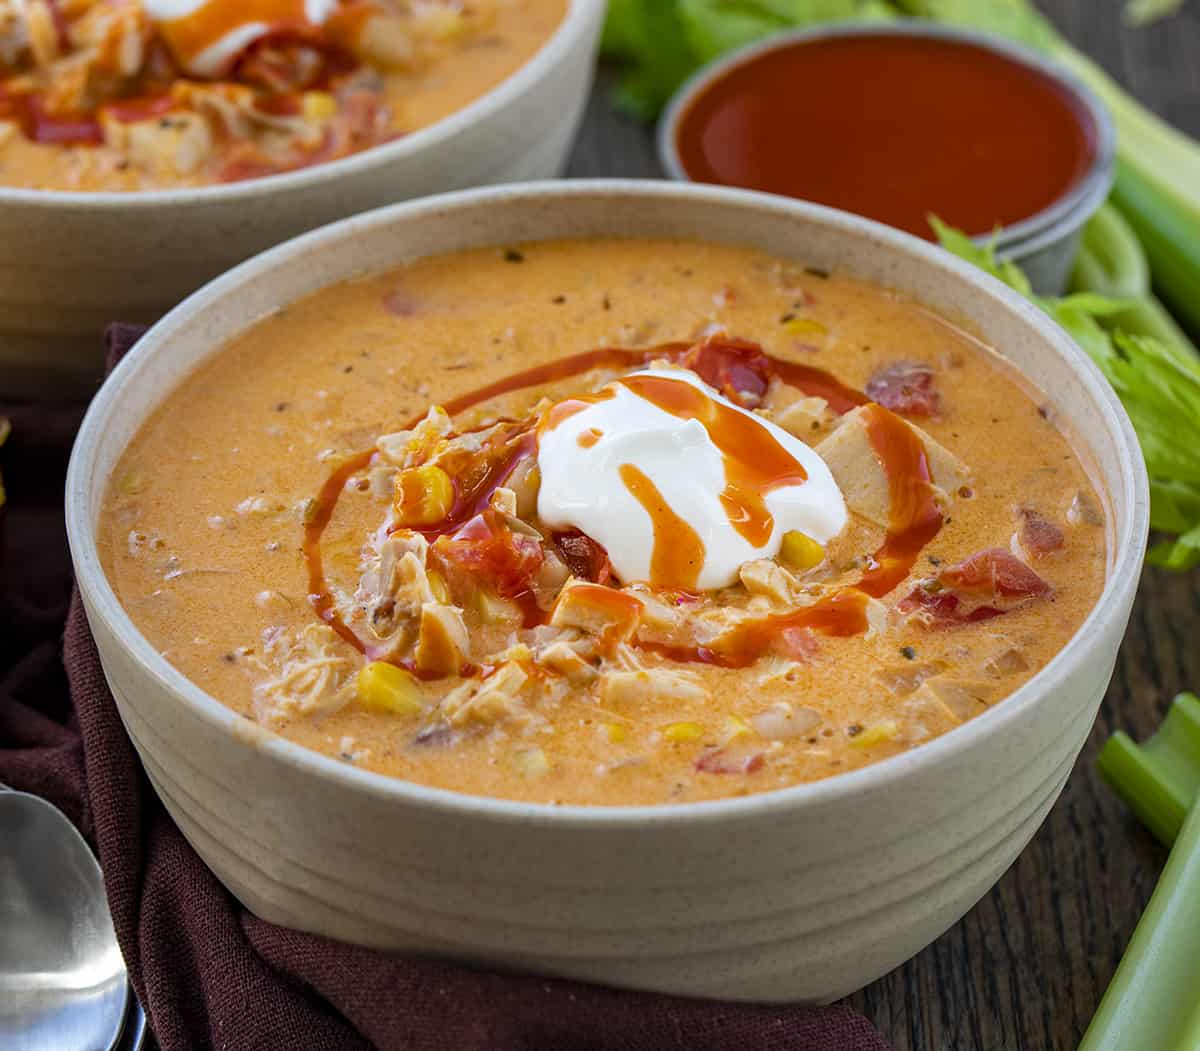 Bowls of Buffalo Chicken Soup with Extra Buffalo Sauce. Soup, Comfort Food, Game Day Food, Fall Soups, Soup Recipes, Buffalo Chicken Recipes, SuperBowl Food, Creamy Soups, Dinner, Supper, recipes, i am homesteader, iamhomesteader